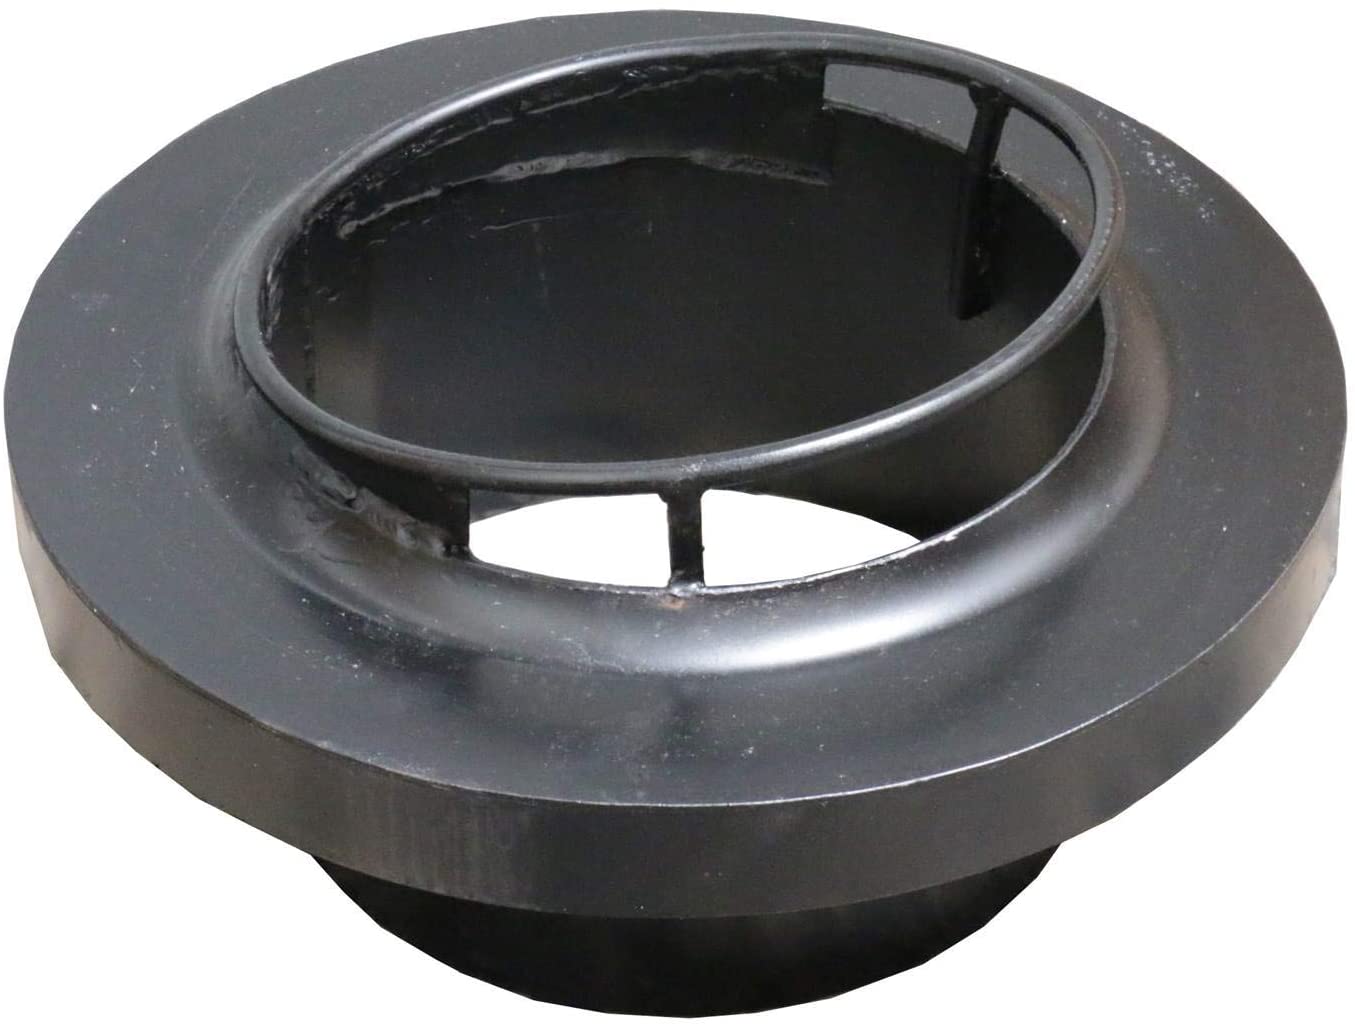 Leyso Chinese Wok Range Adapter/Reducer with Welded Ring - Convert The